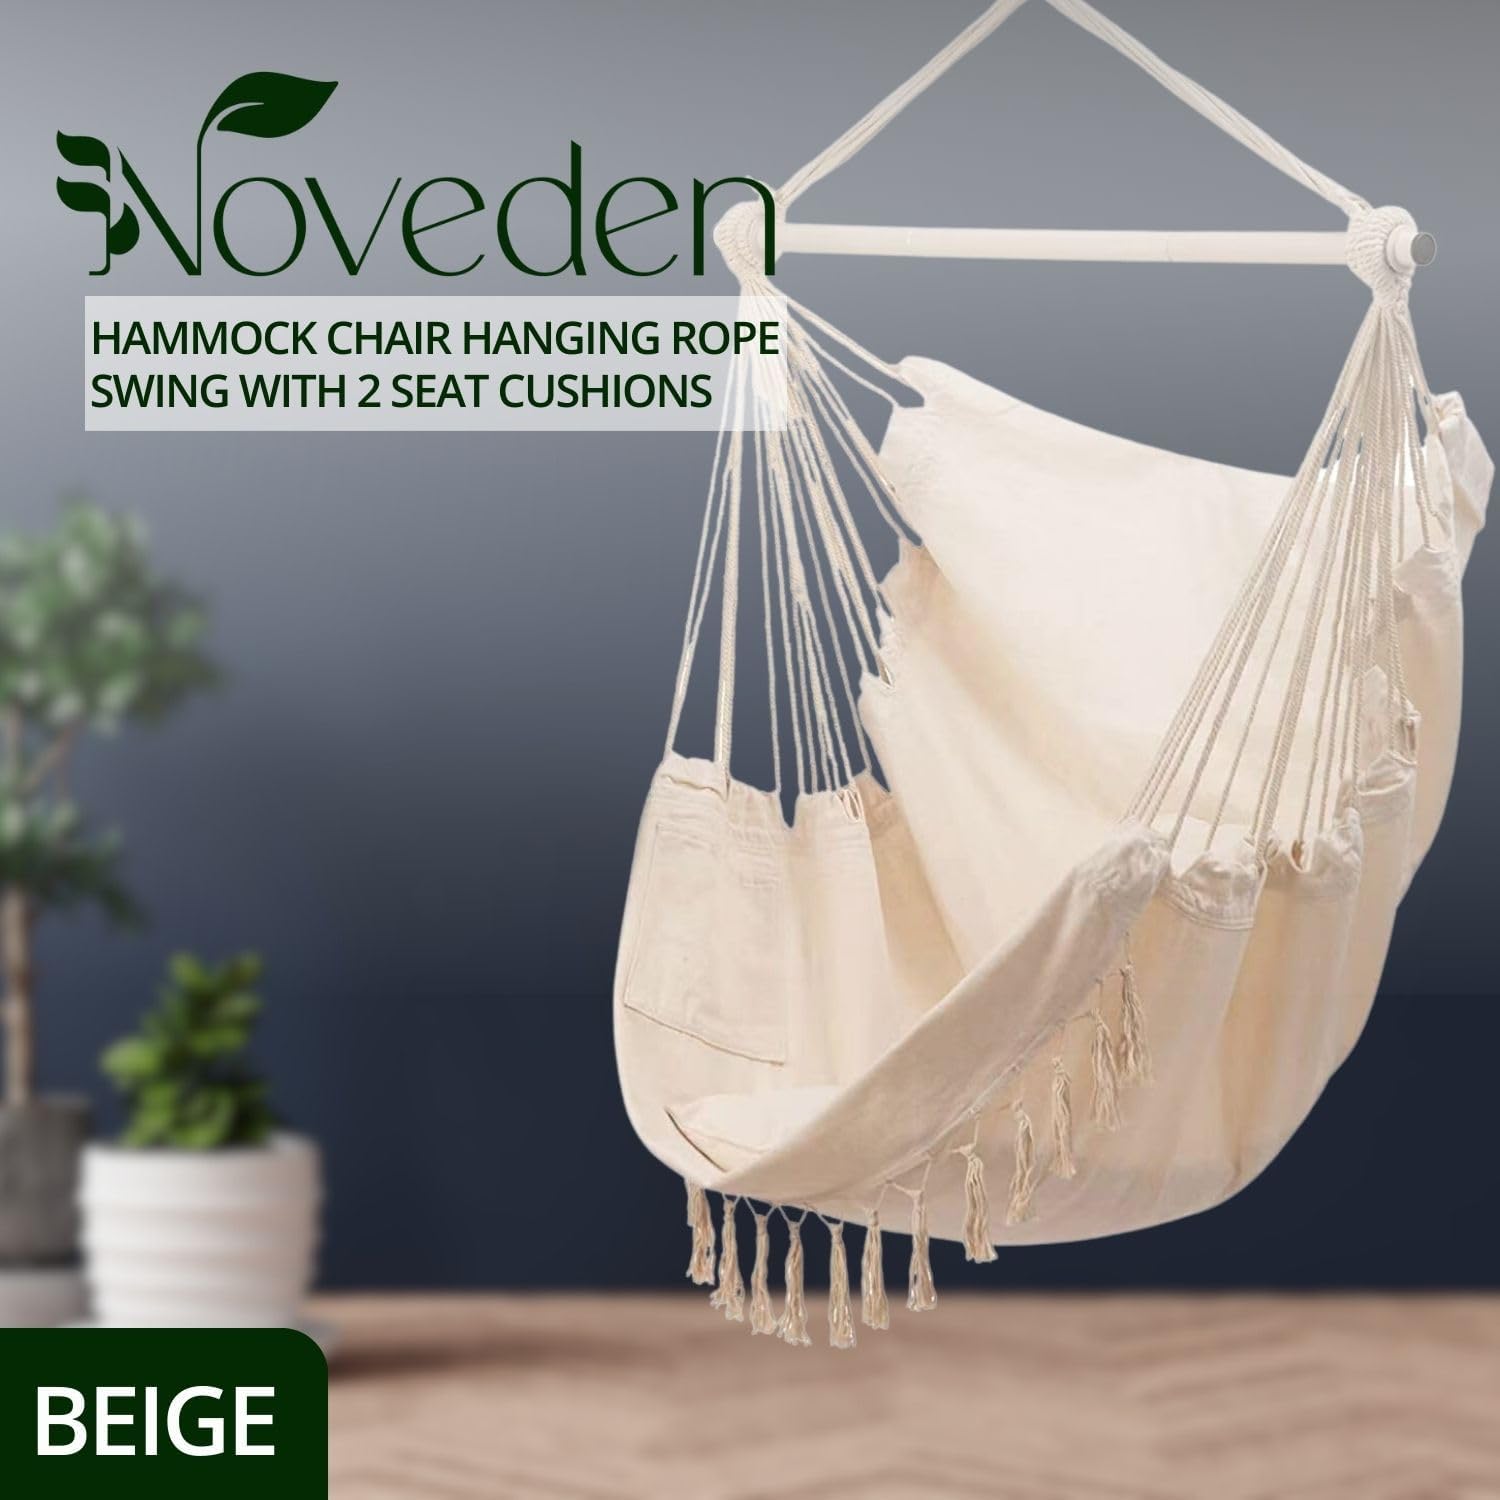 NOVEDEN Hammock Chair Hanging Rope Swing with 2 Seat Cushions Included (Beige)